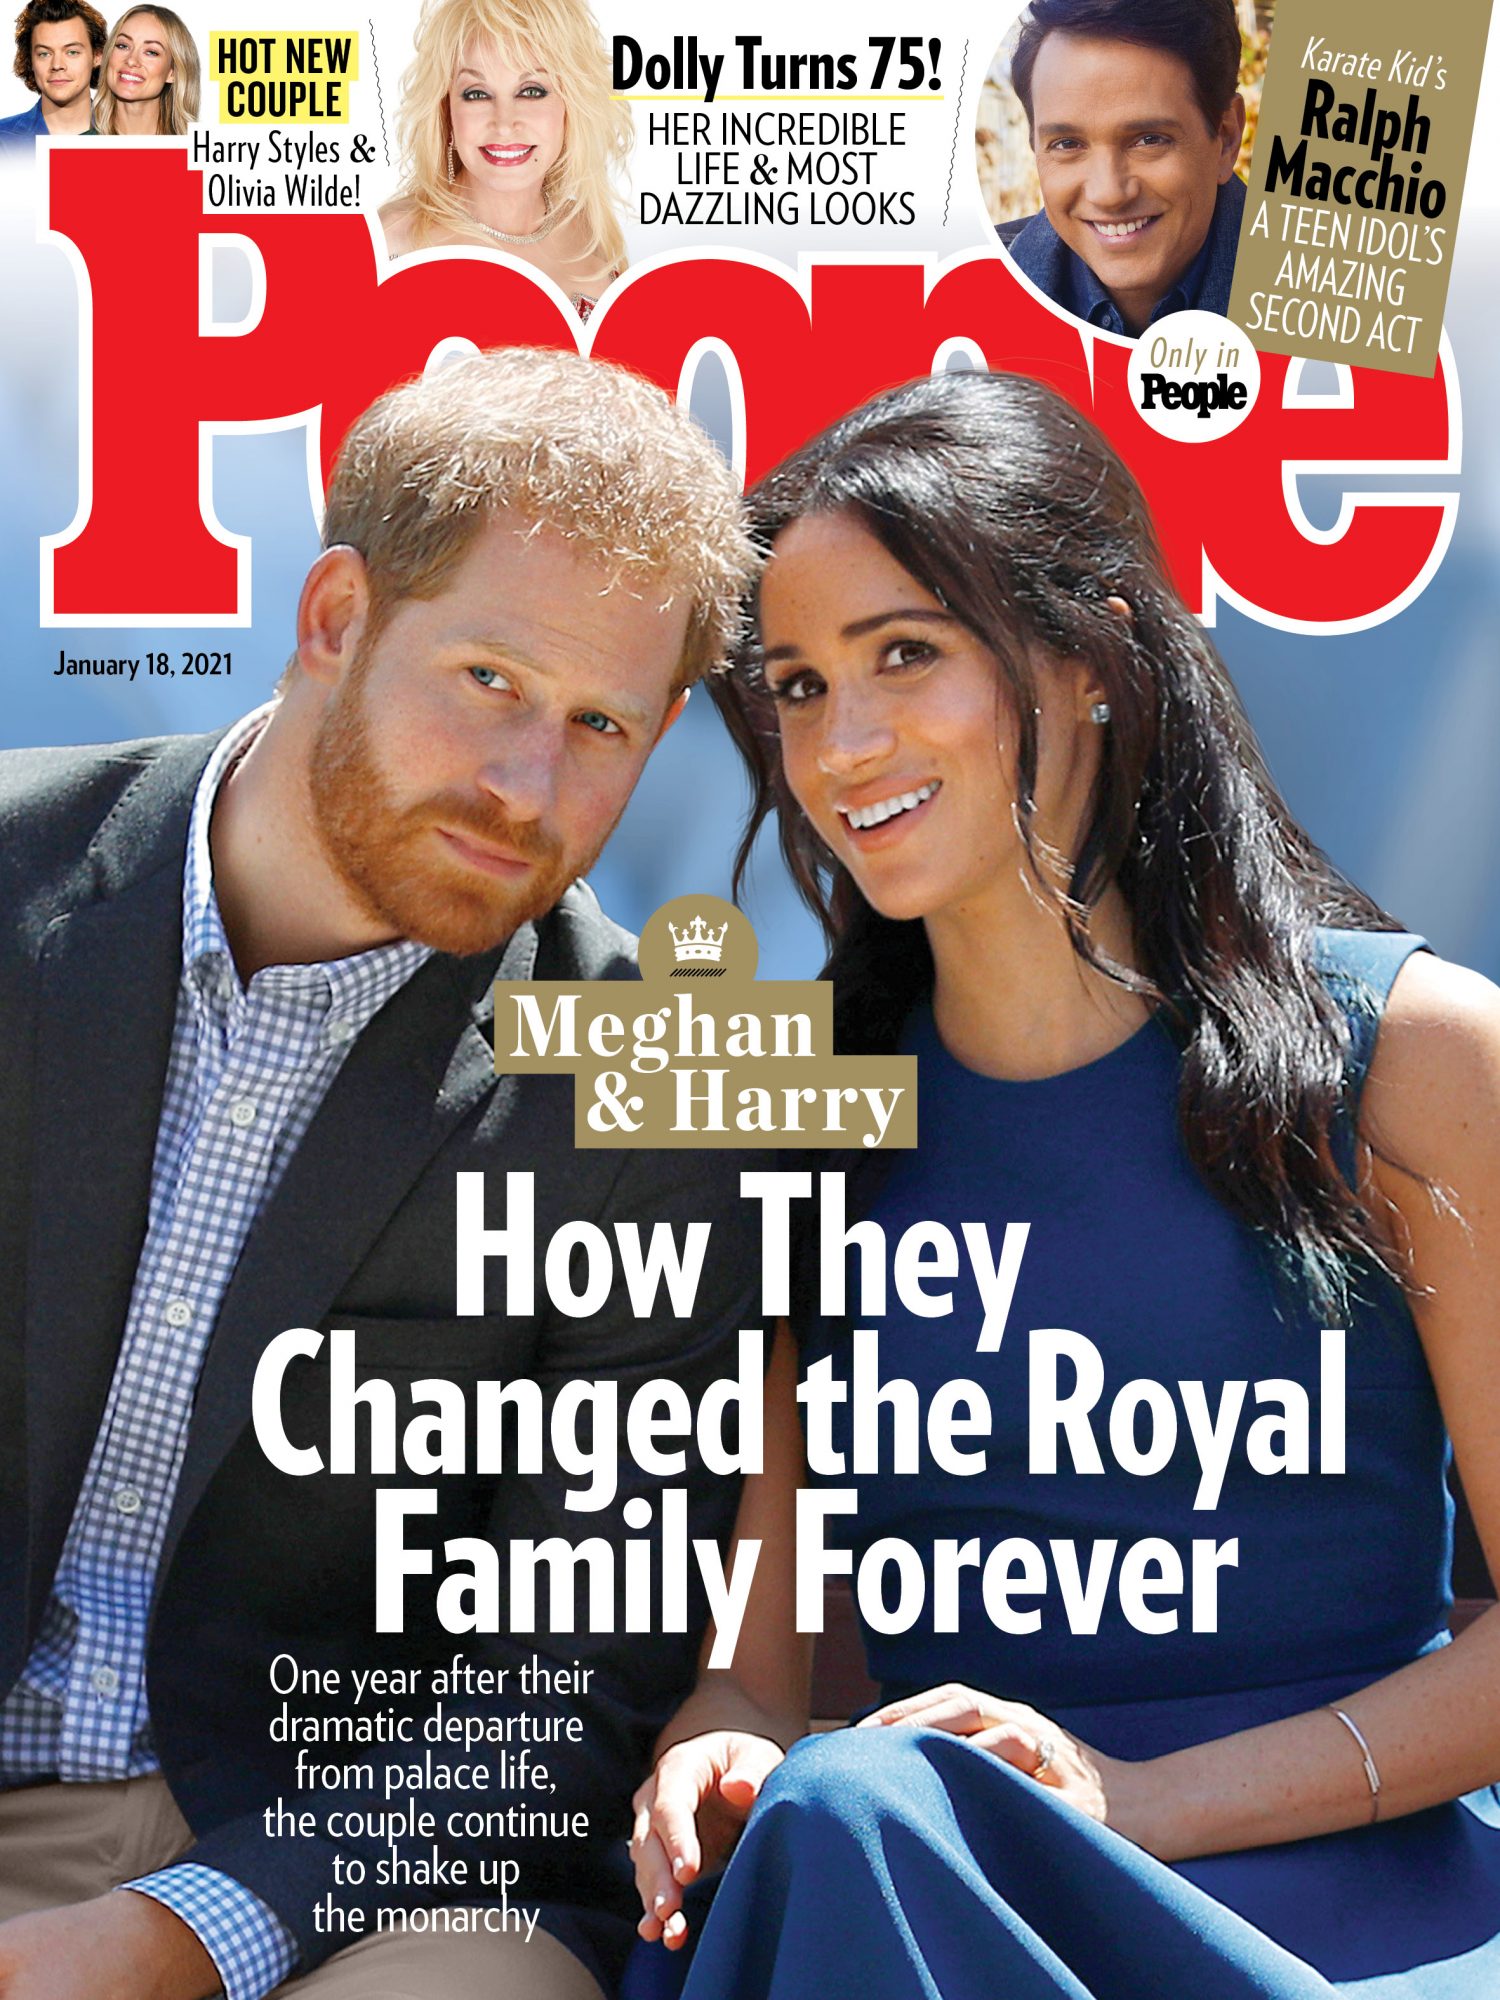 Prince Harry and Meghan Markle cover PEOPLE one year after announcing